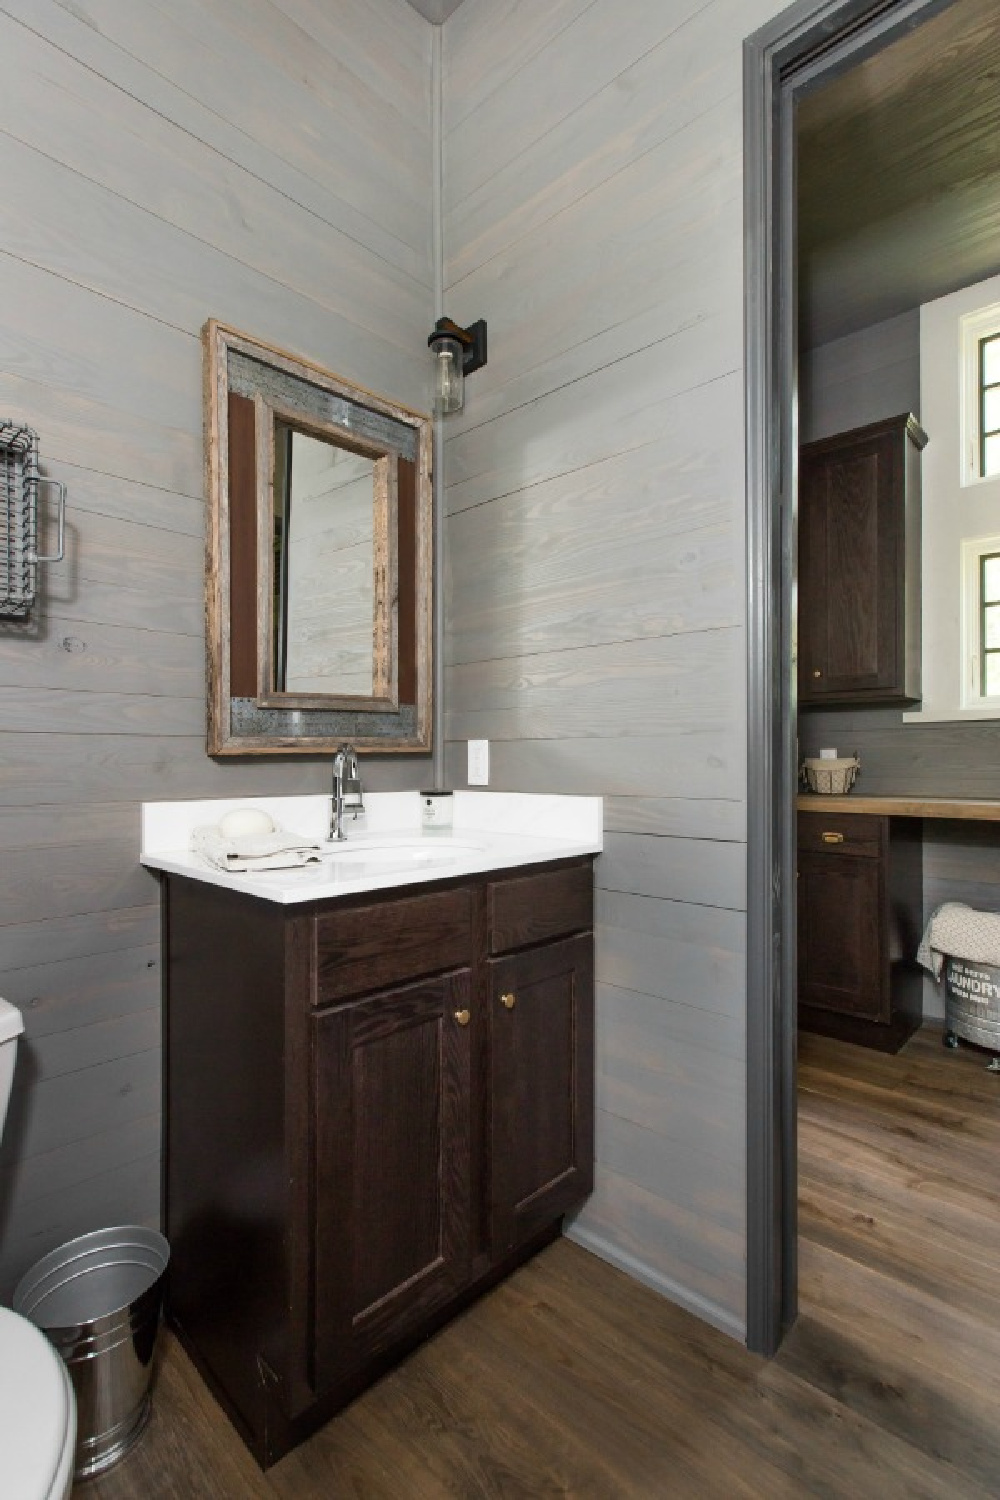 Bathroom in Jeffrey Dungan designed tiny house with finely crafted Low Country style -one of the cottages at The Retreat at Oakstone in Tennessee. #tinyhousedesign